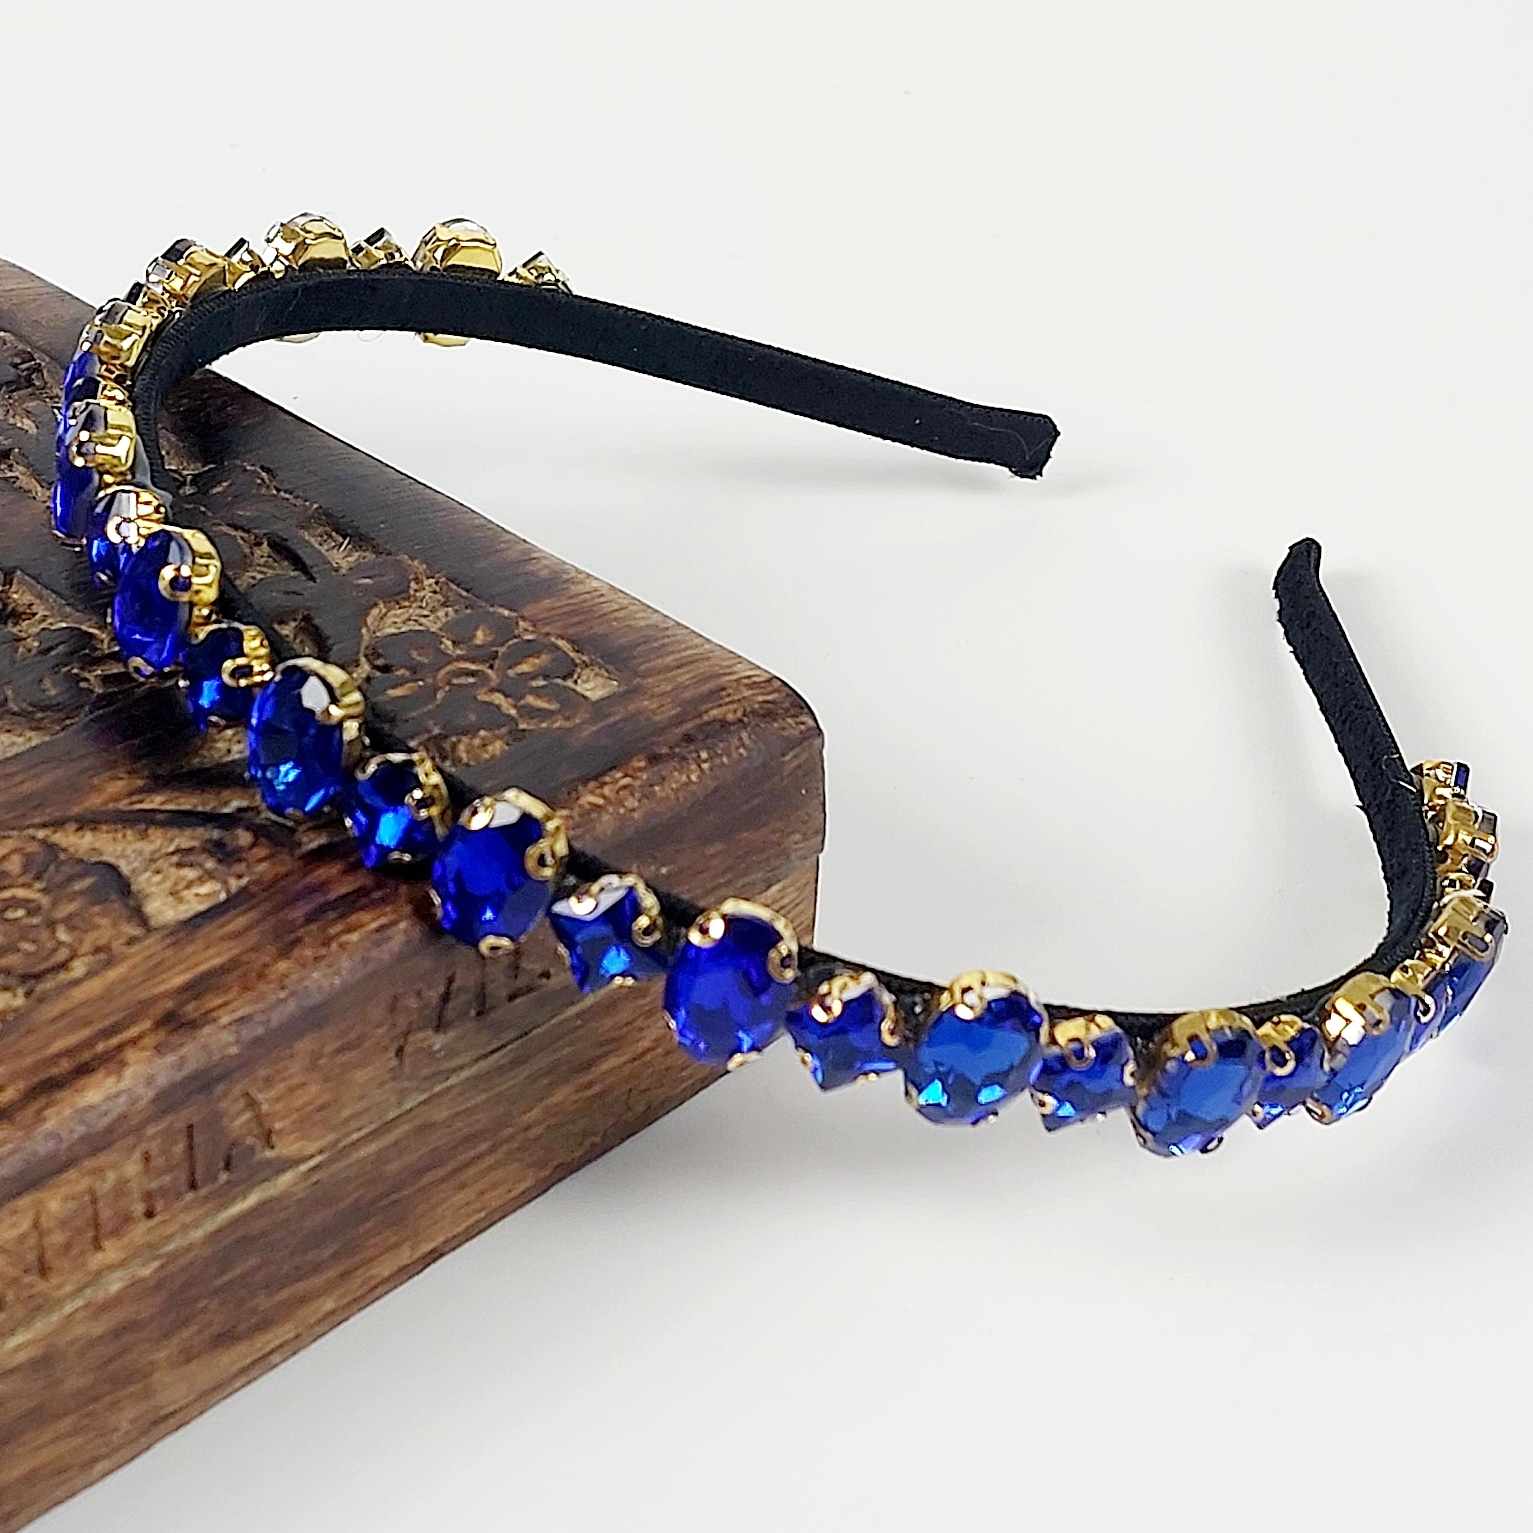 wear royal blue crystal jewelled headband to the races